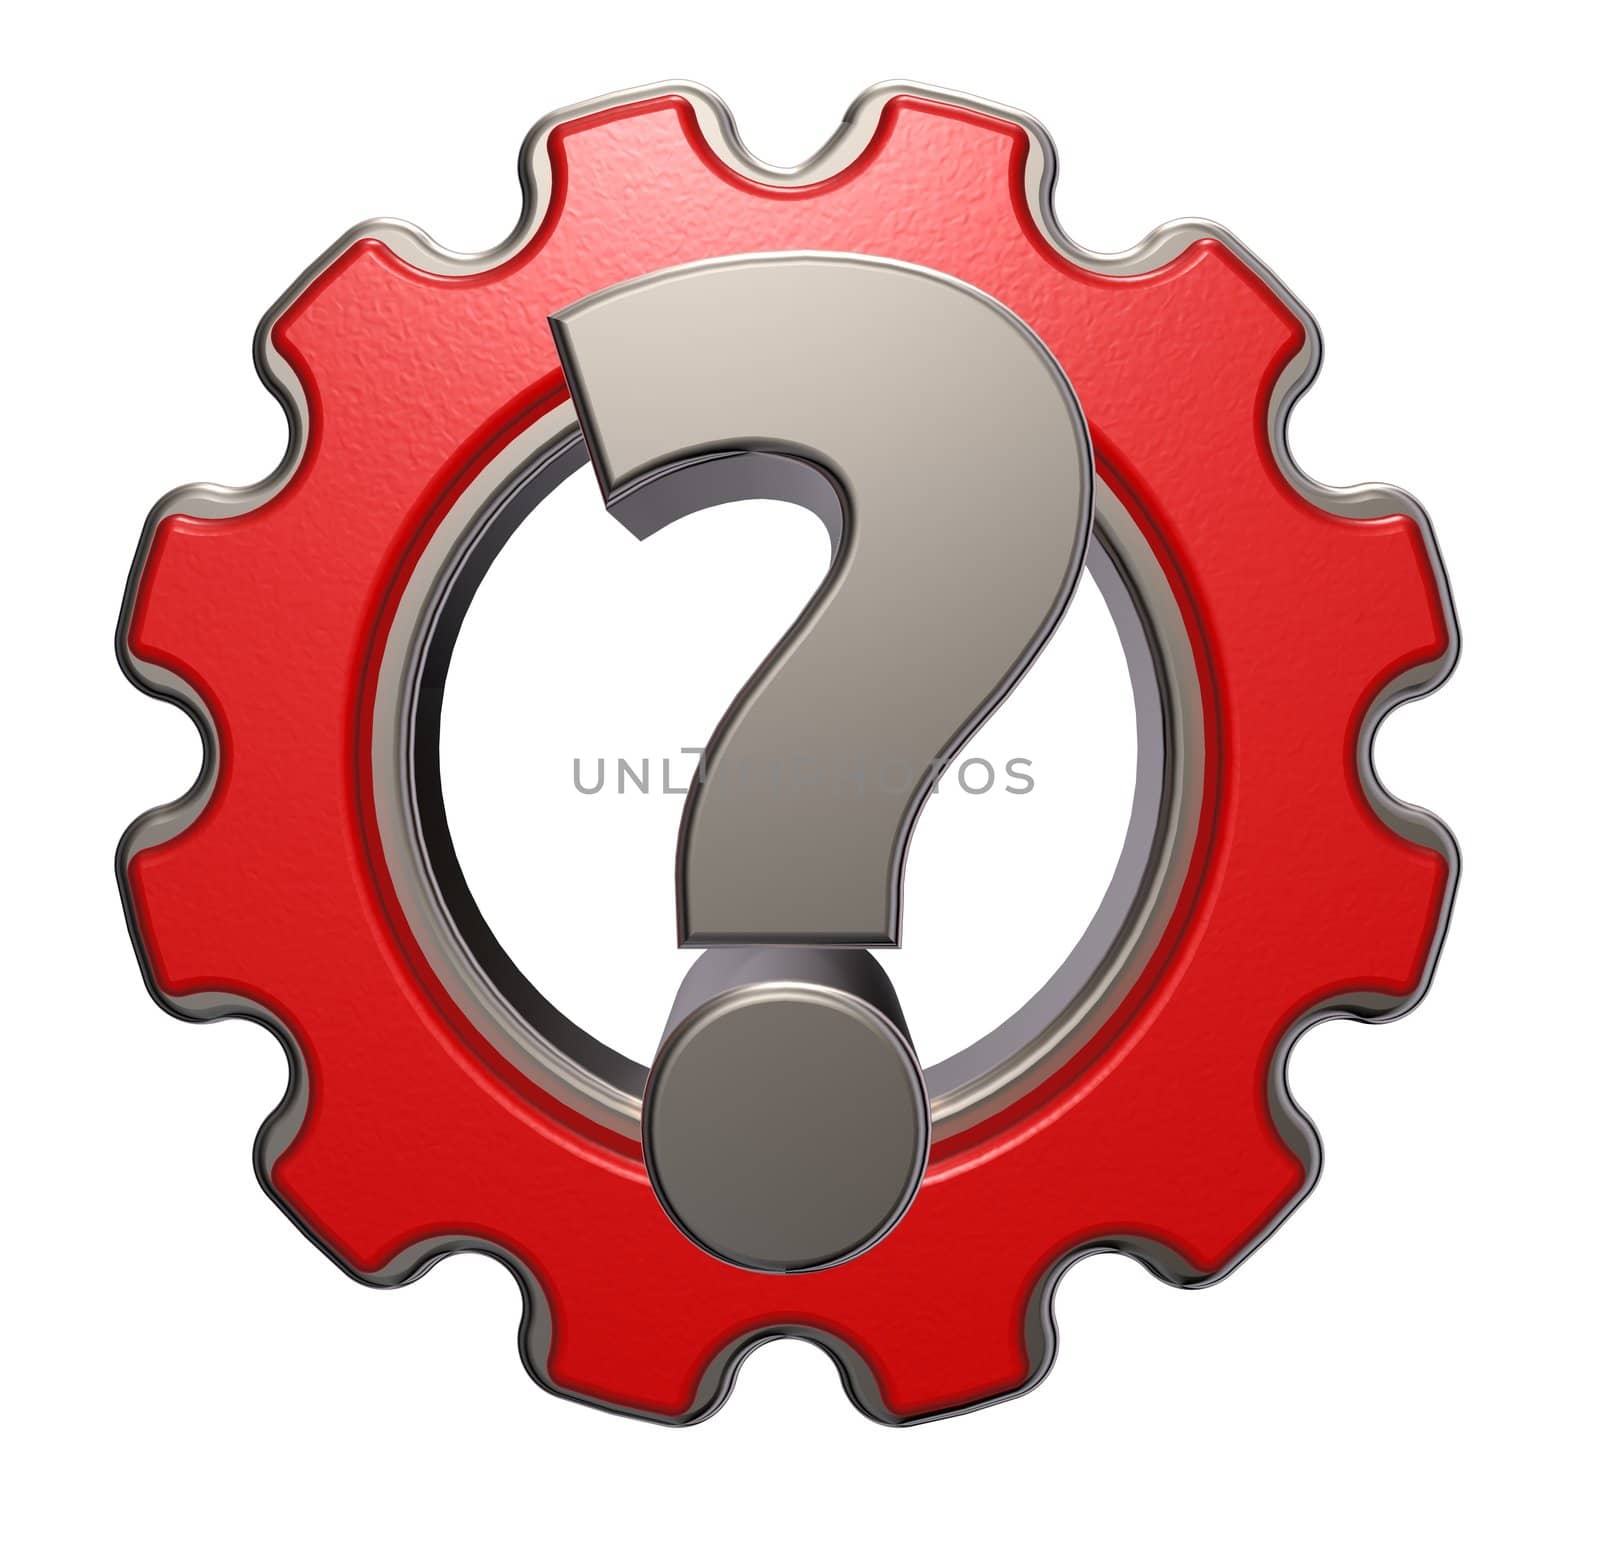 gear wheel and question mark on white background - 3d illustration